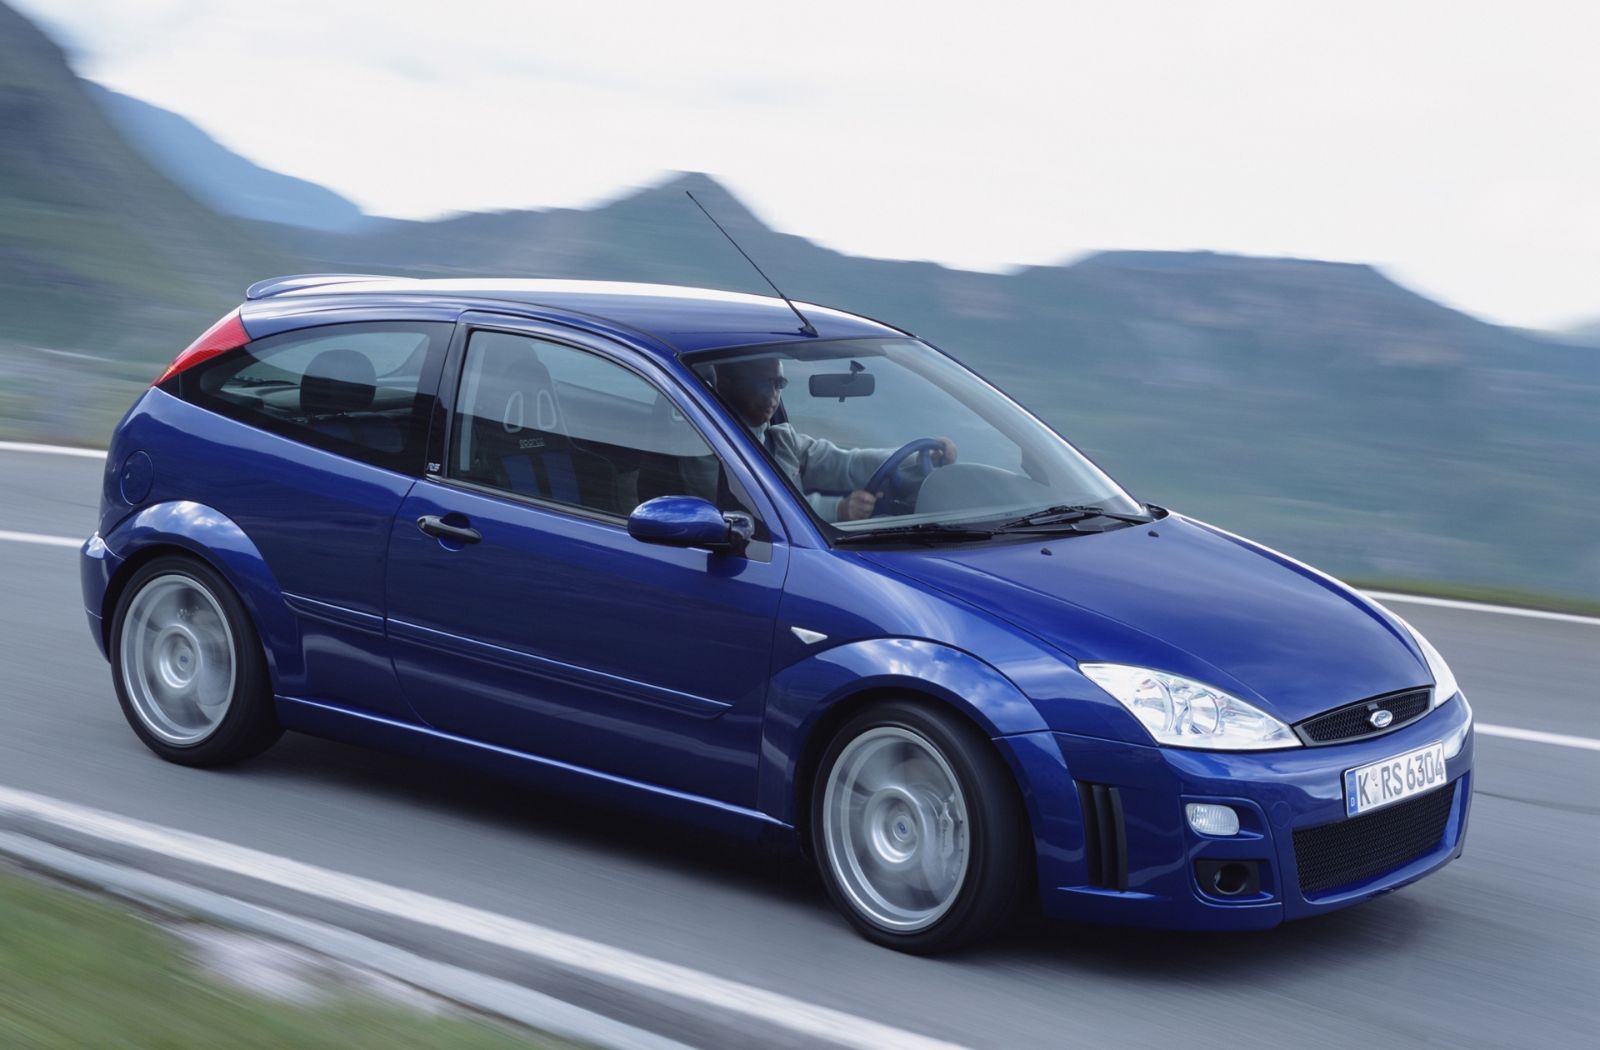 The Mk1 Focus RS Turns 20 and It's Still One of the Most Fun FWD